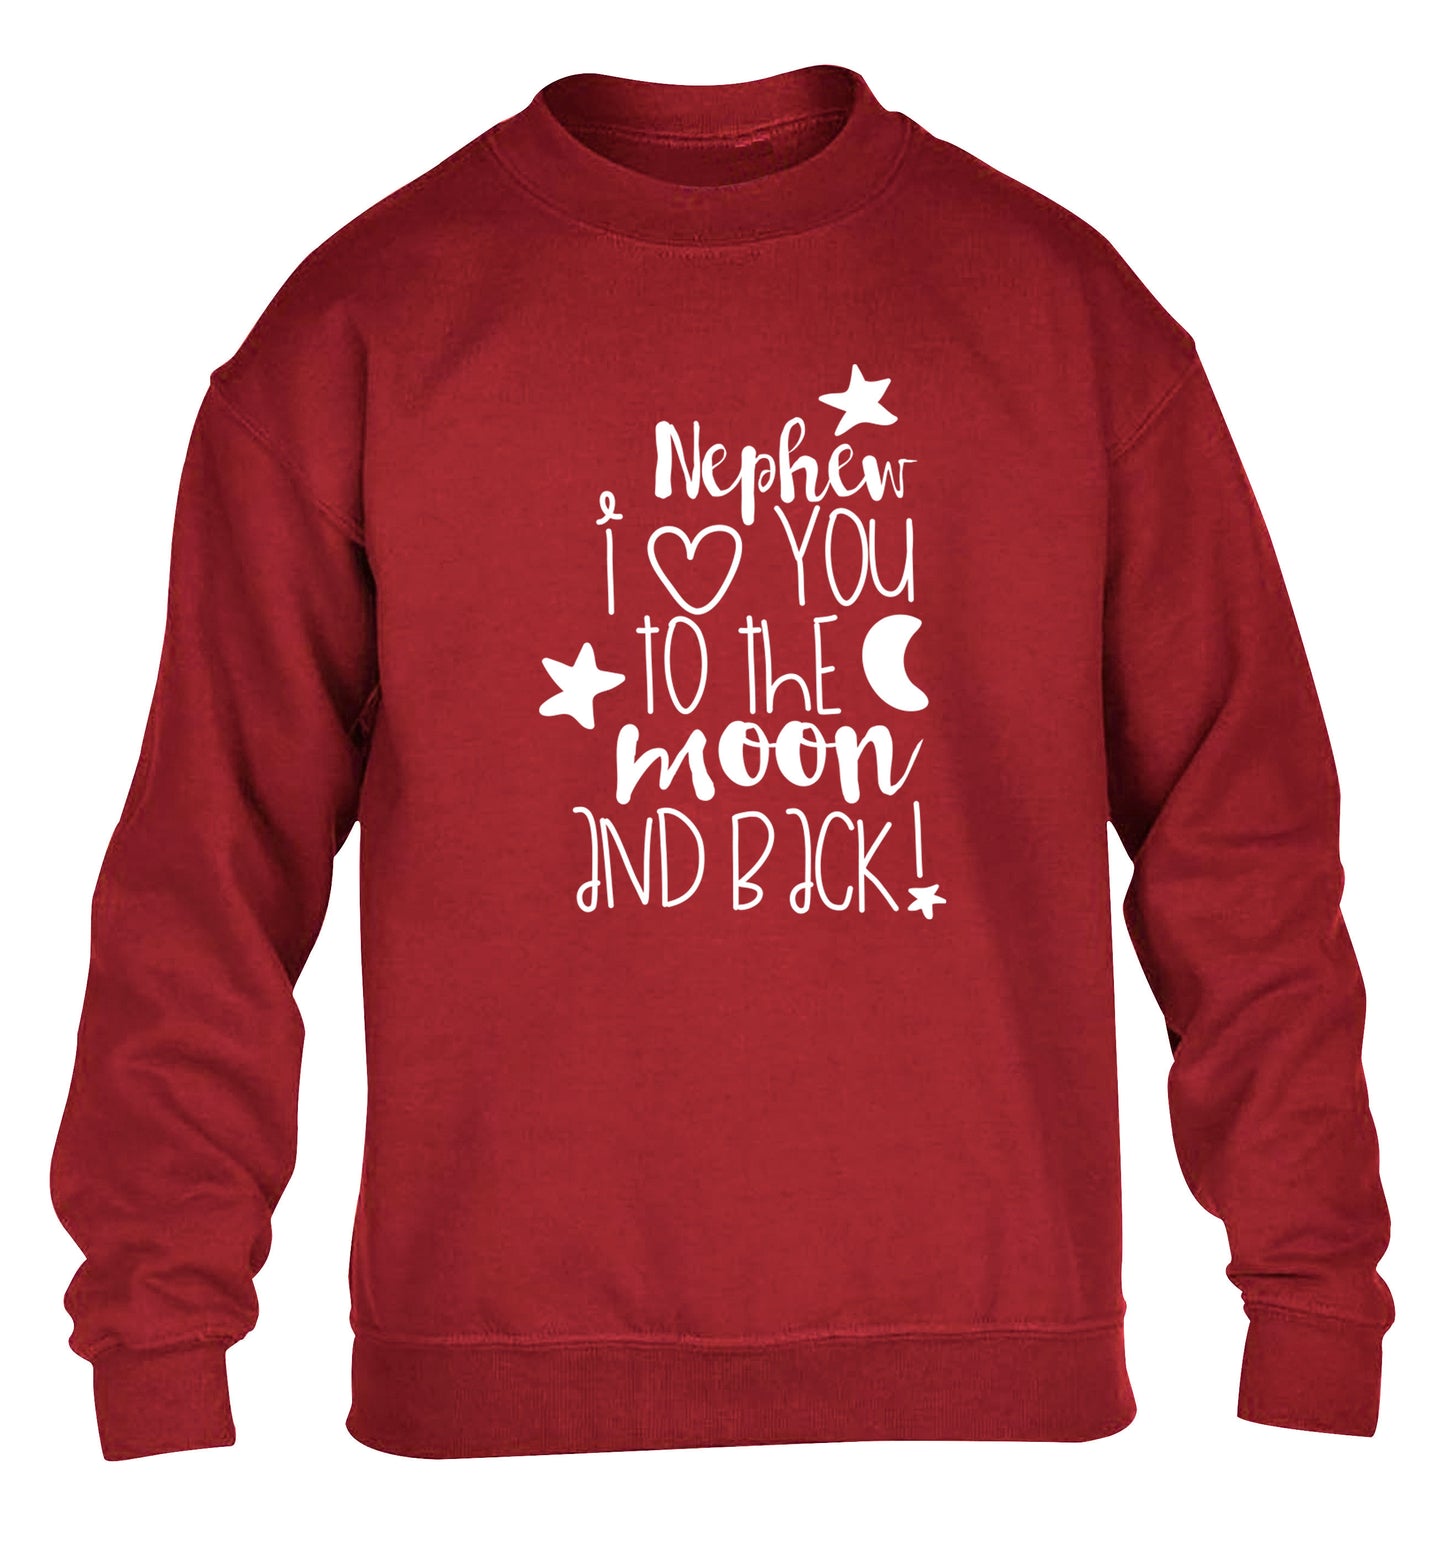 Nephew I love you to the moon and back children's grey  sweater 12-14 Years